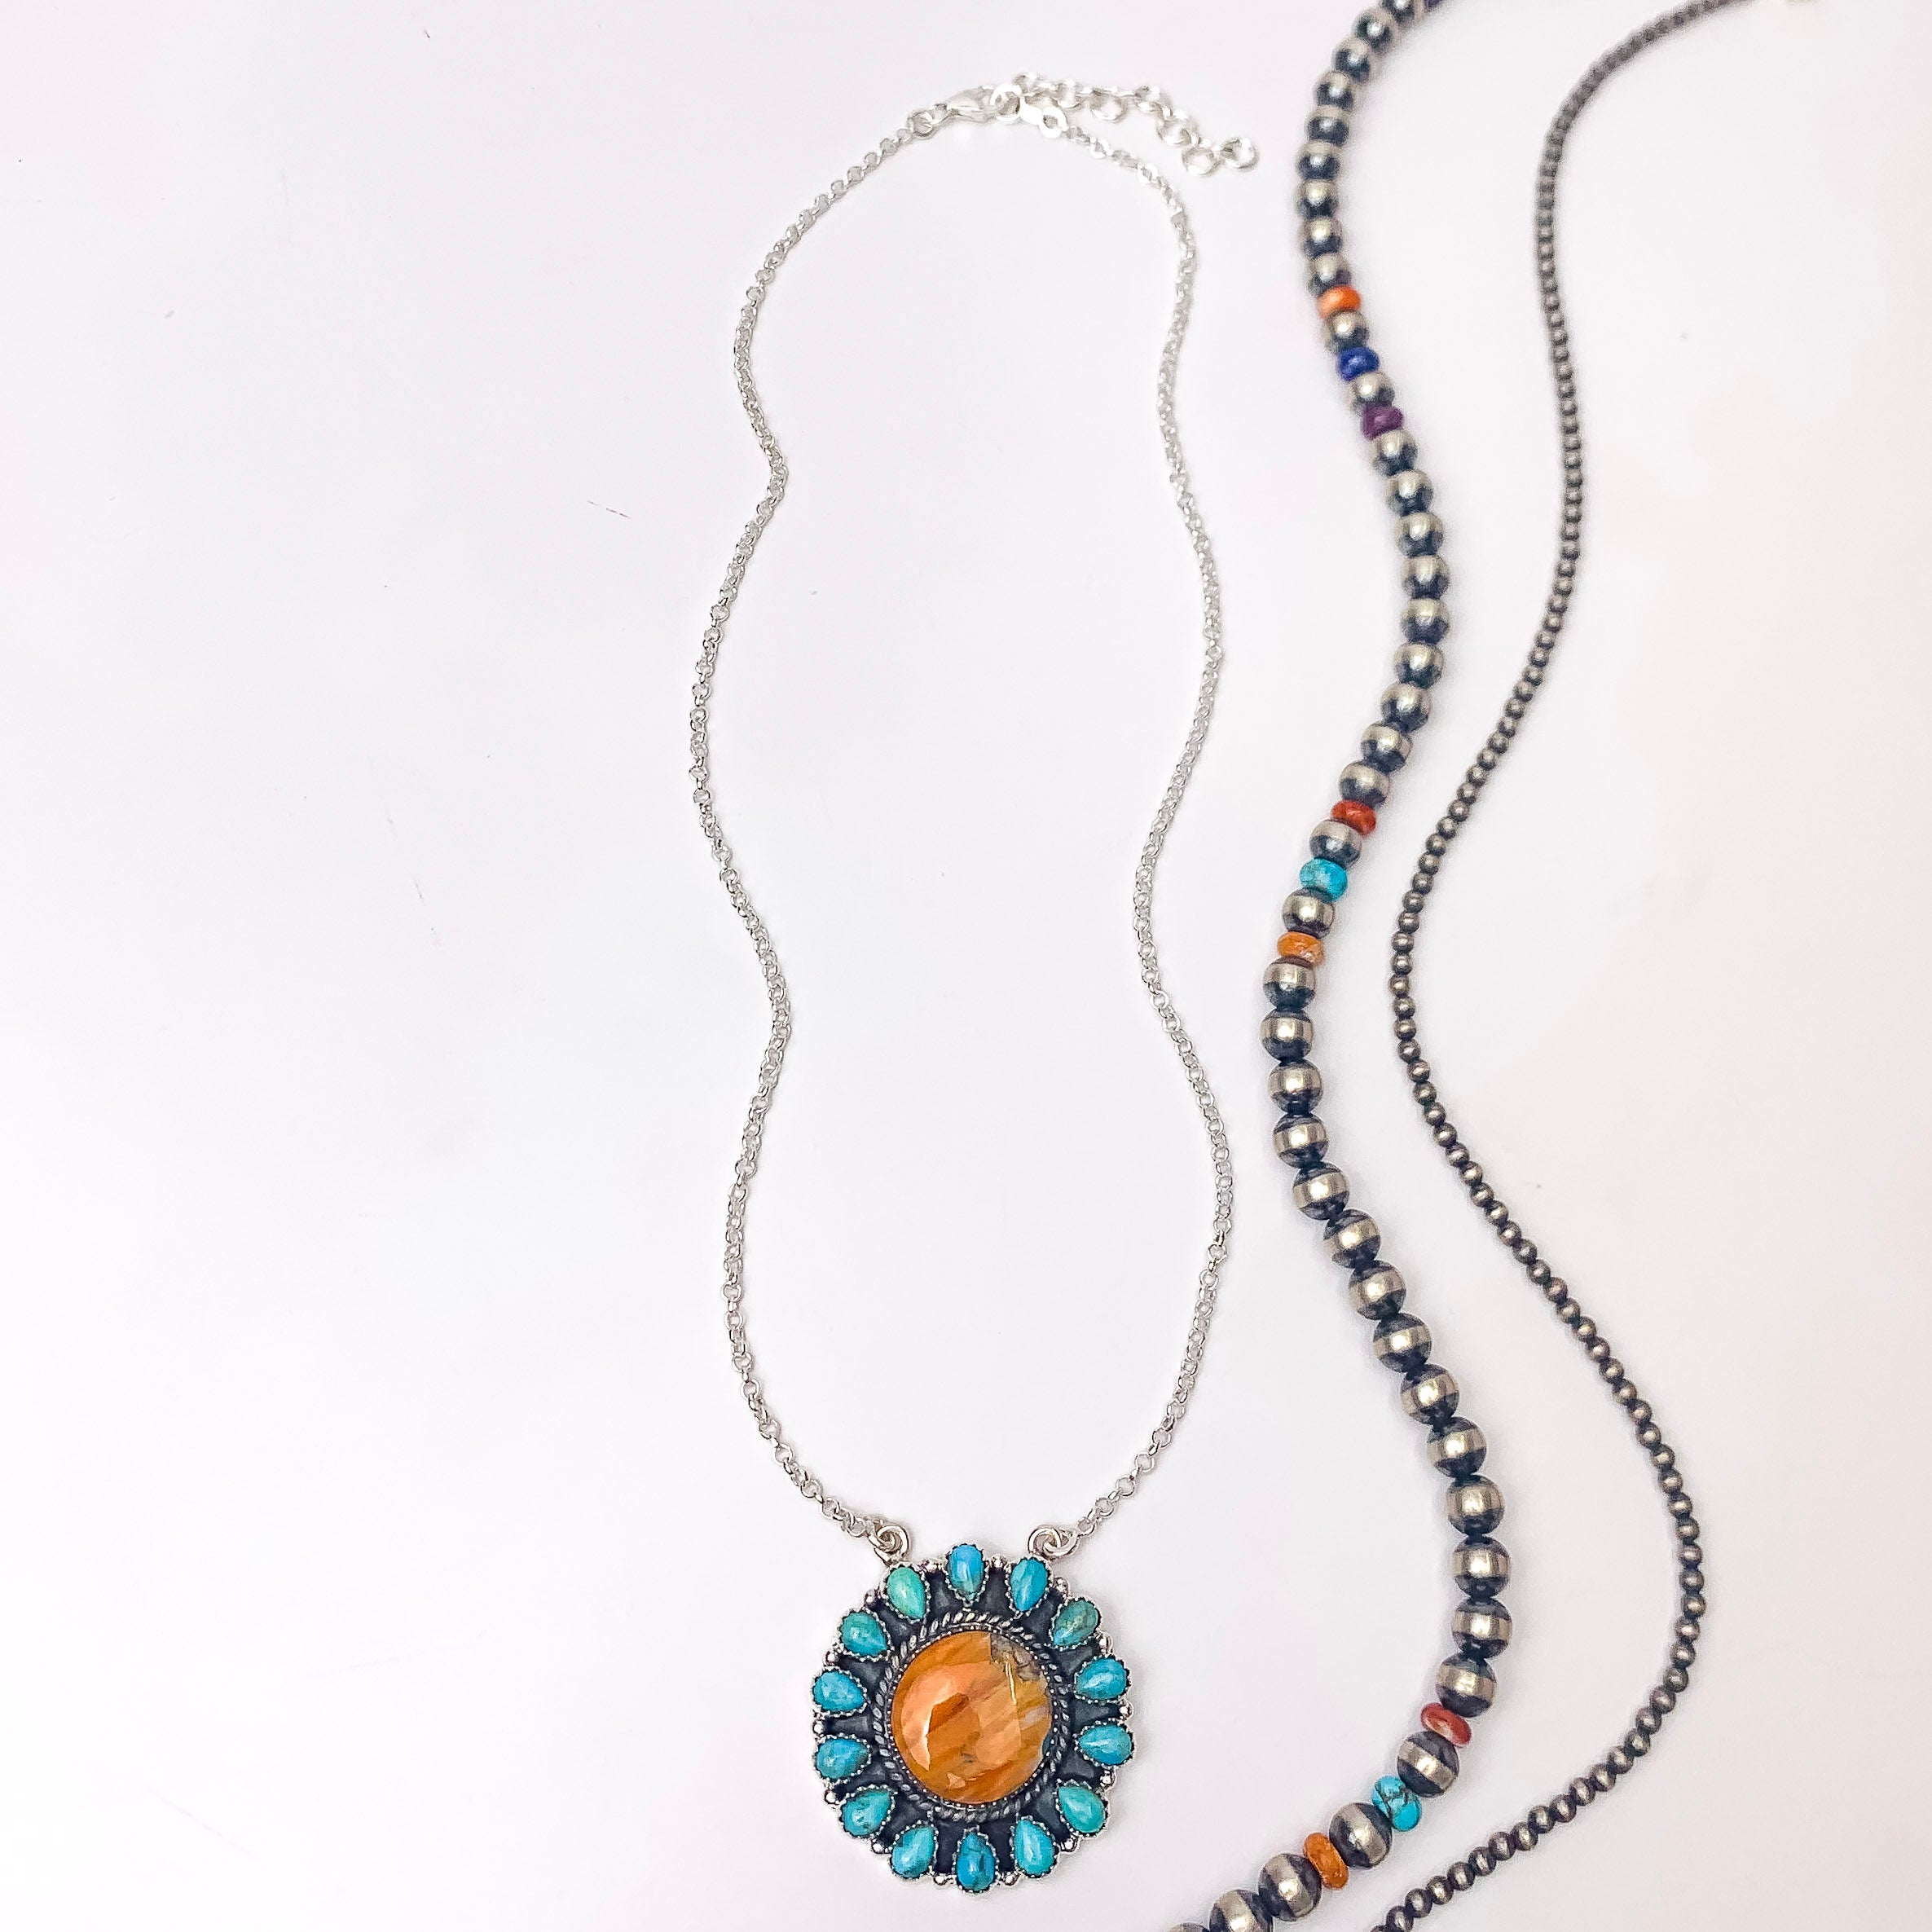 Hada Collection | Handmade Sterling Silver Necklace with Spiny Oyster Center and Turquoise Outline - Giddy Up Glamour Boutique